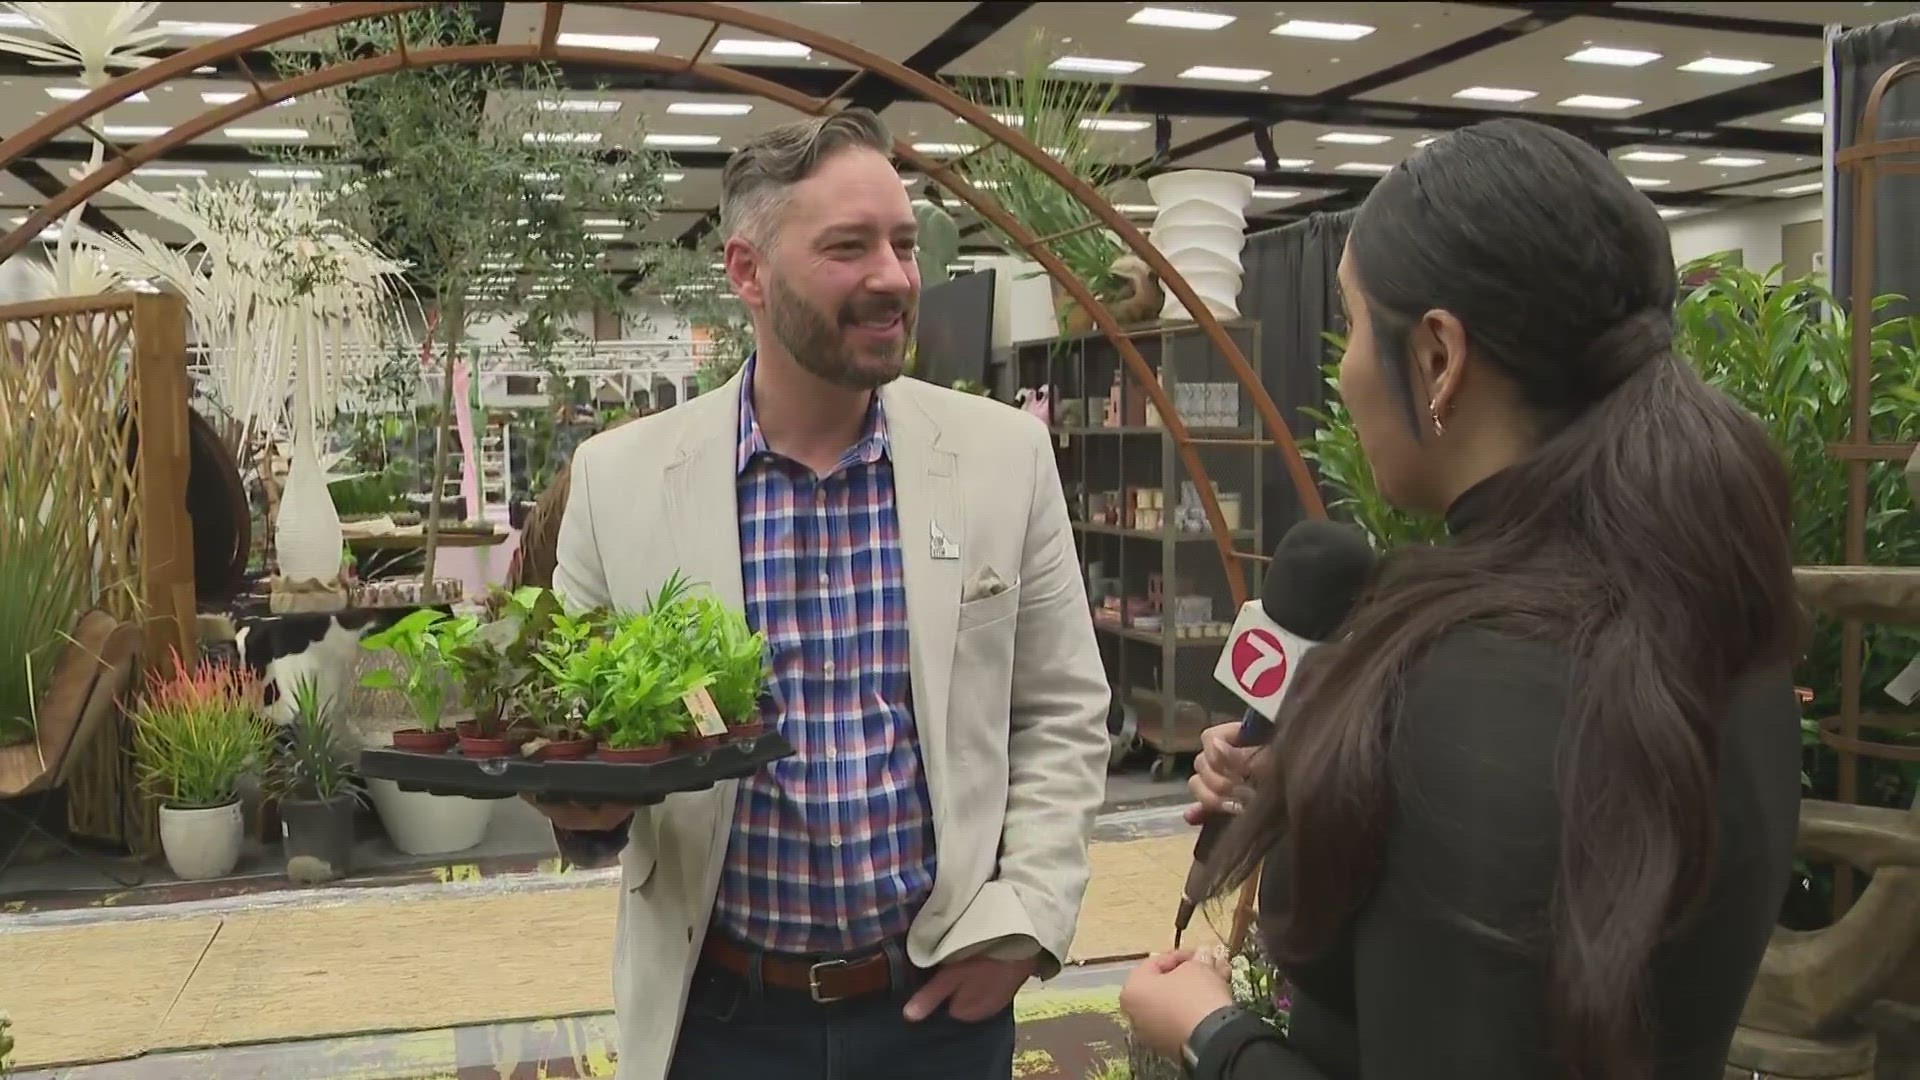 The 26th annual Boise Flower and Garden Show kicks off Friday; but ahead of the excitement, Brenda Rodriguez got an inside look at all the setup.